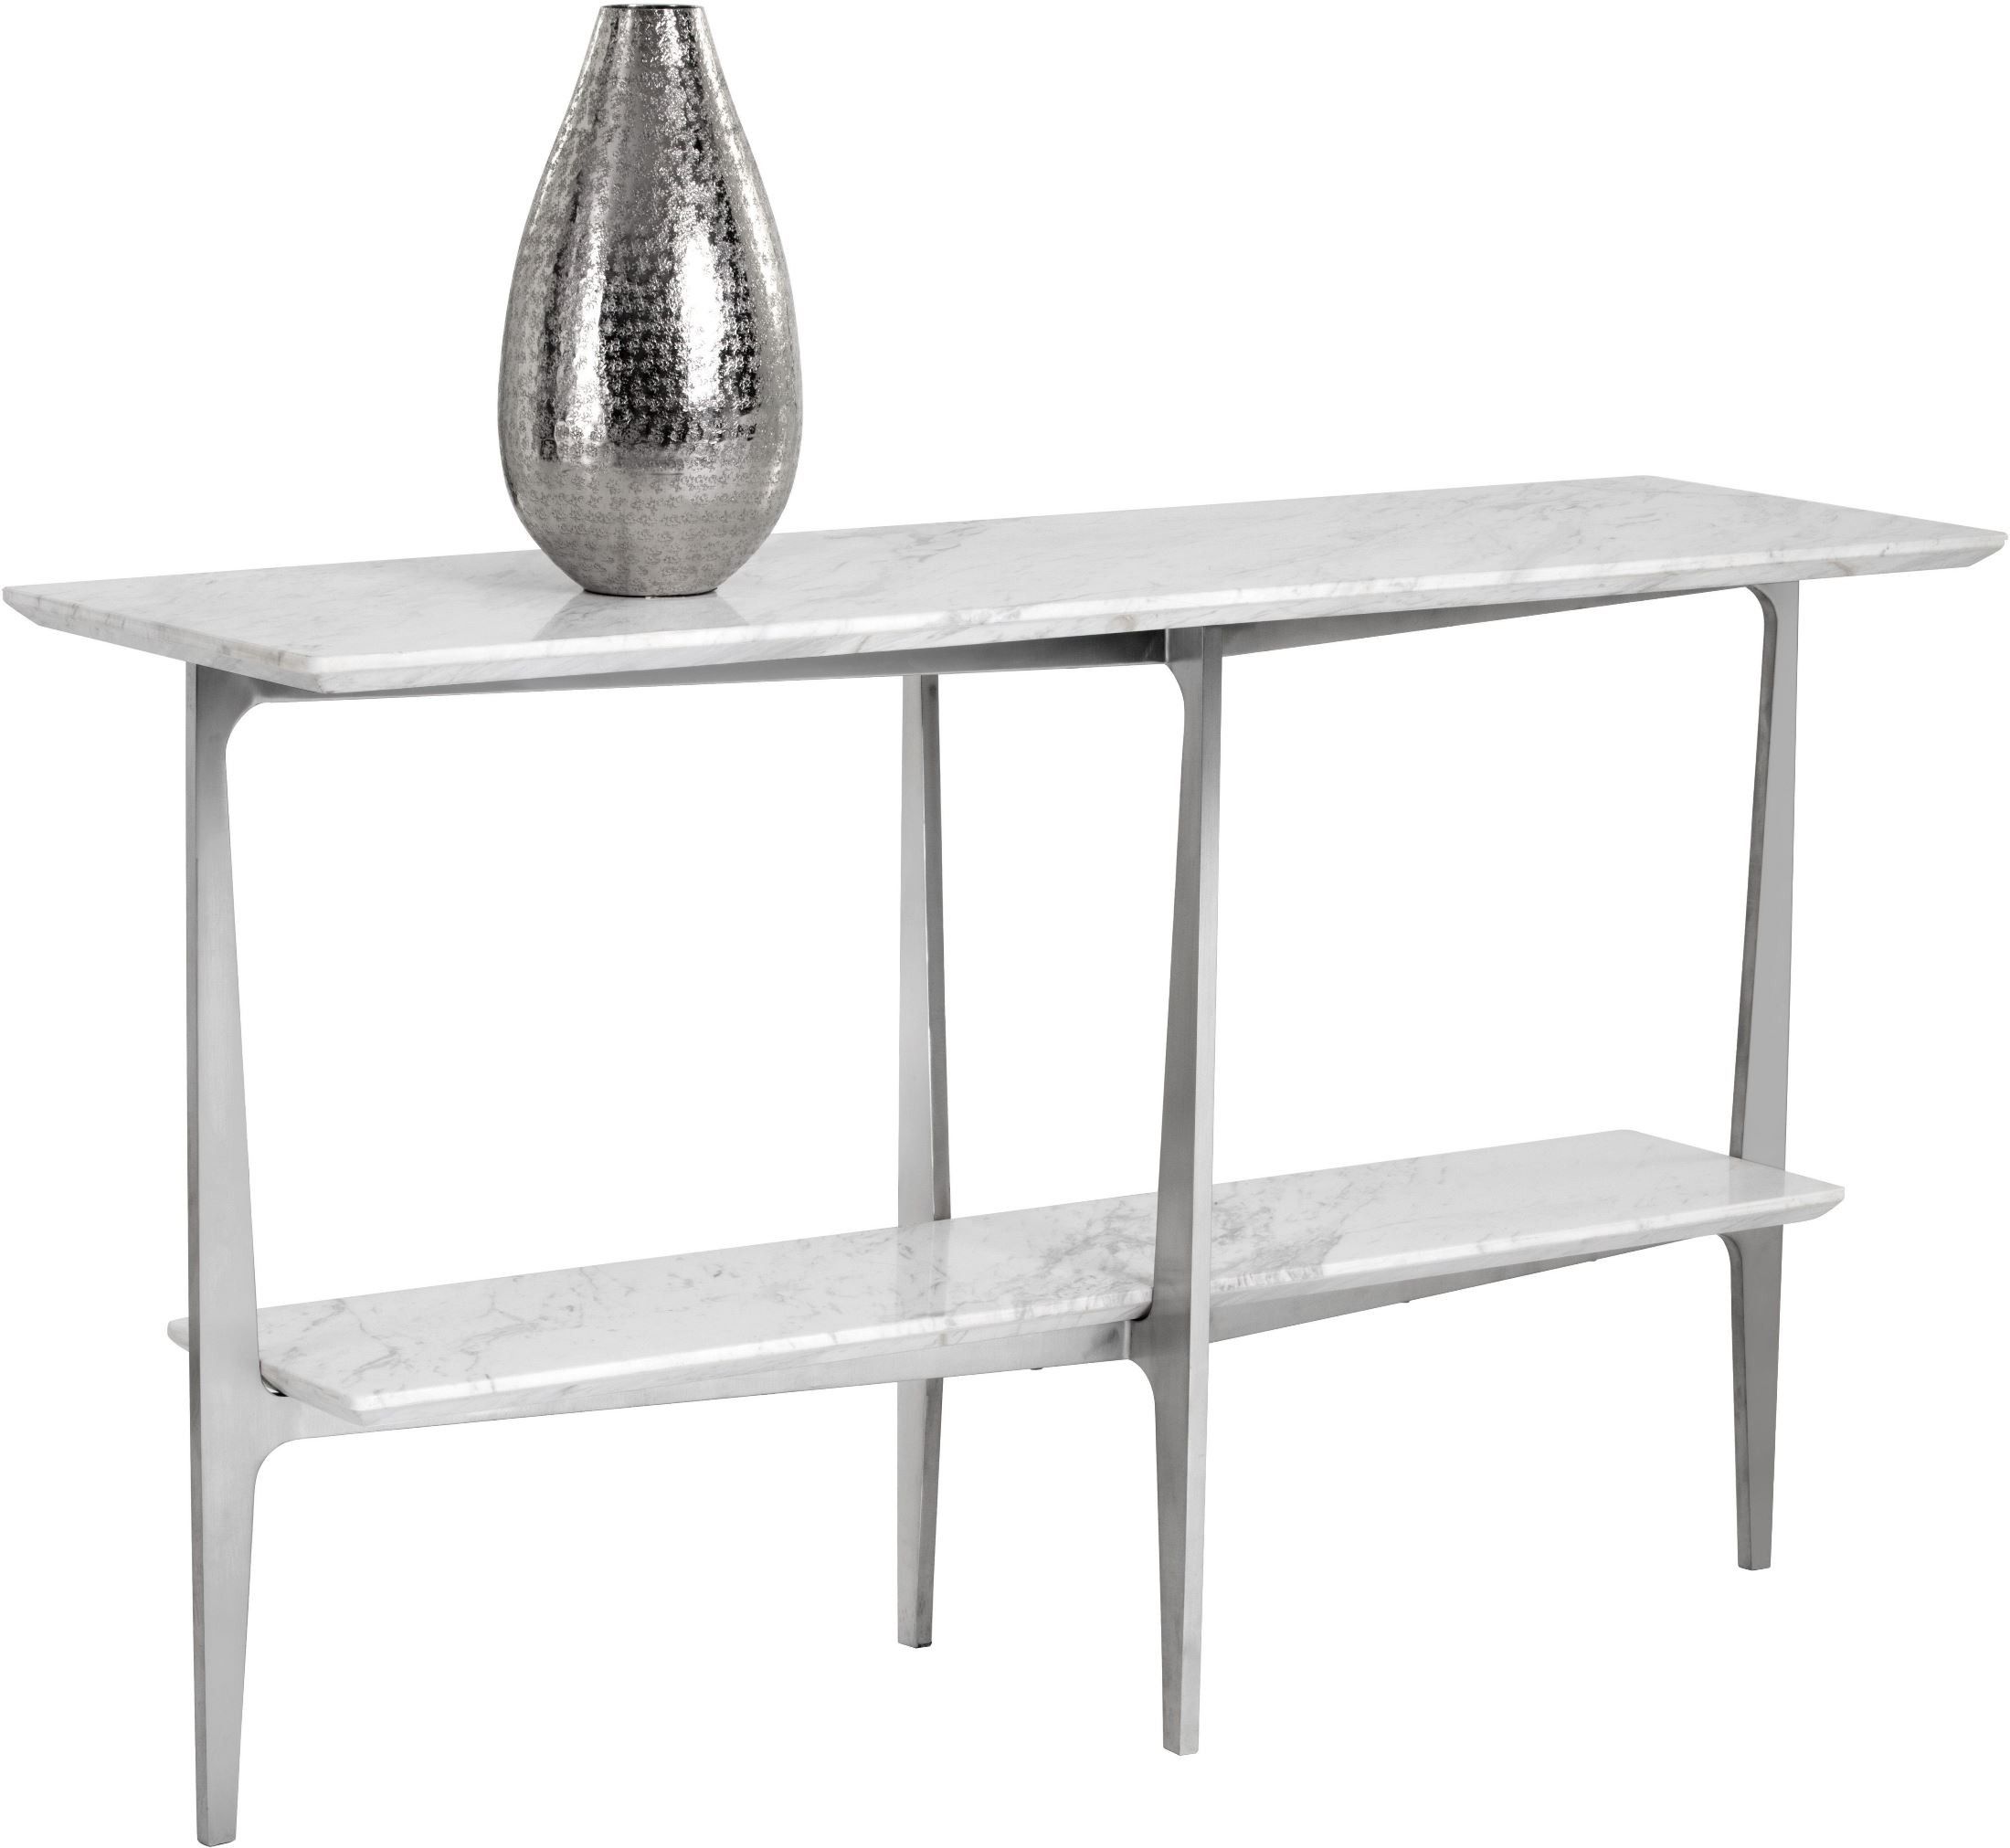 Clearwater White Marble Console Table From Sunpan | Coleman Furniture Inside White Geometric Console Tables (View 14 of 20)